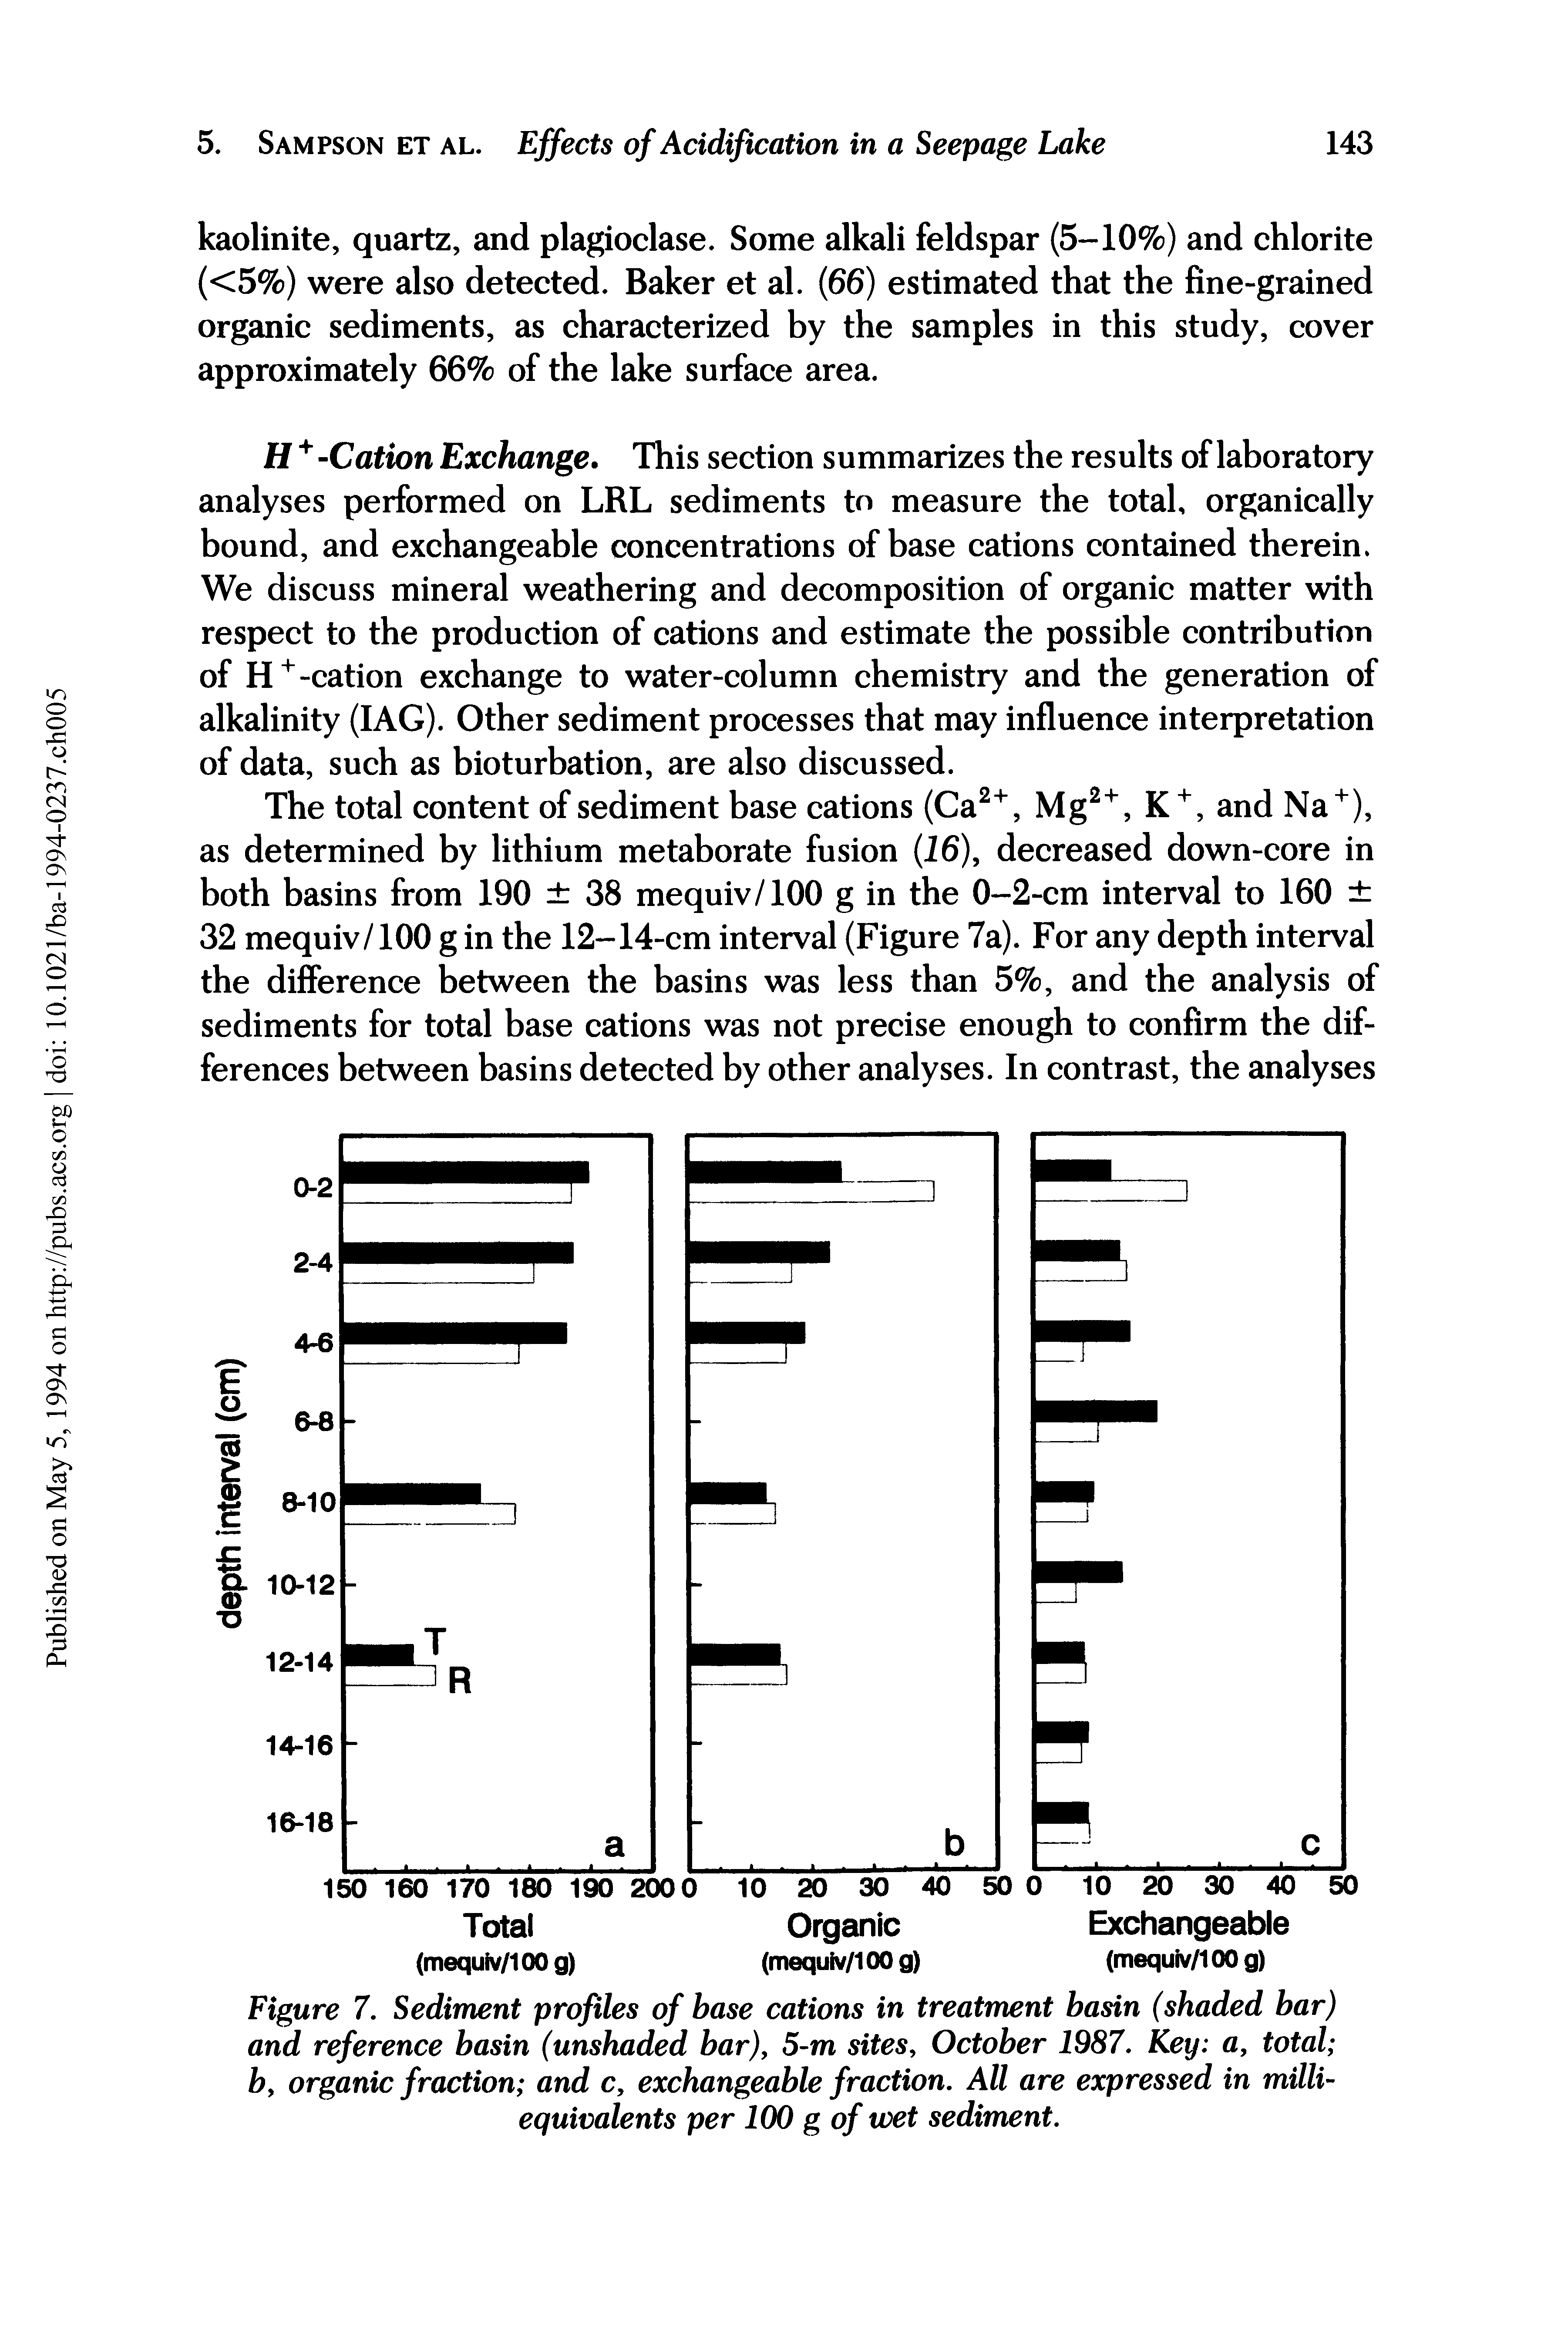 Figure 7. Sediment profiles of base cations in treatment basin (shaded bar) and reference basin (unshaded bar), 5-m sites, October 1987. Key a, total b, organic fraction and c, exchangeable fraction. All are expressed in milli-equivalents per 100 g of wet sediment.